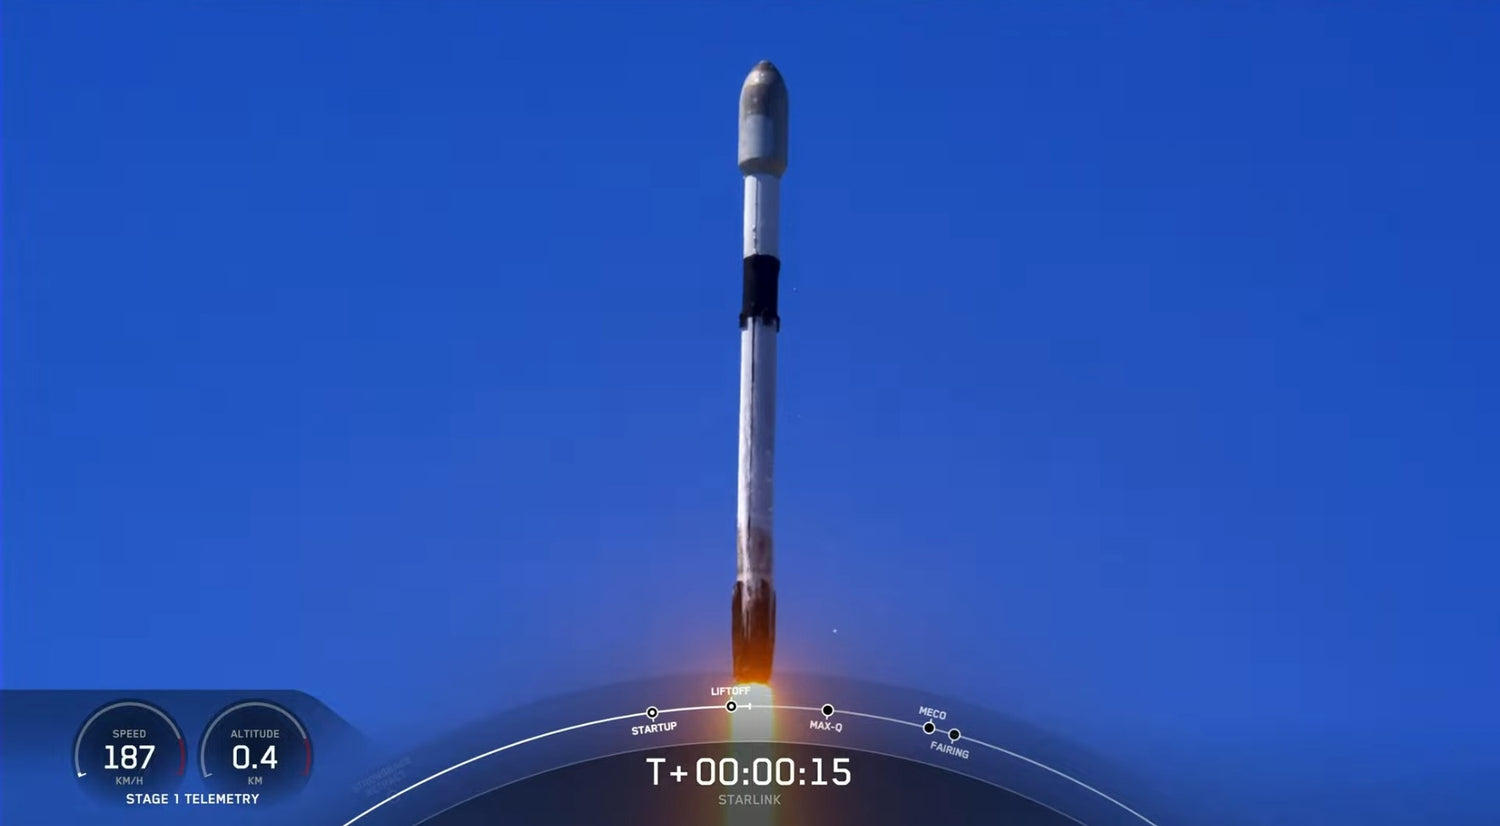 SpaceX's Friday the 13th launch deploys Starlink satellites from California, Next mission will lift off from Florida in ~22.5 hours